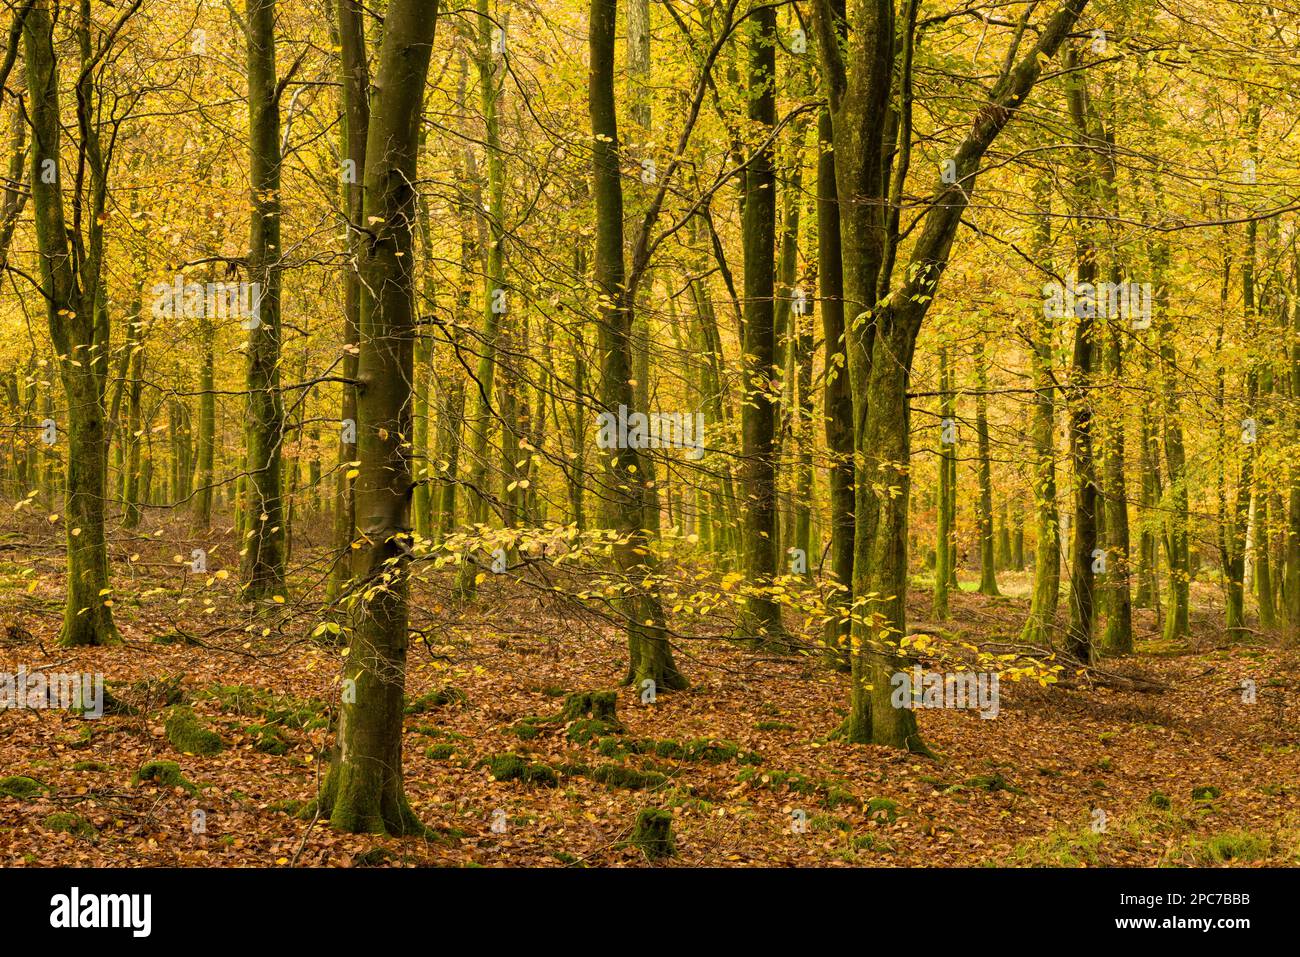 Autumn colour in a beech woodland at Rowberrow Warren in the Mendip Hills, Somerset, England. Stock Photo